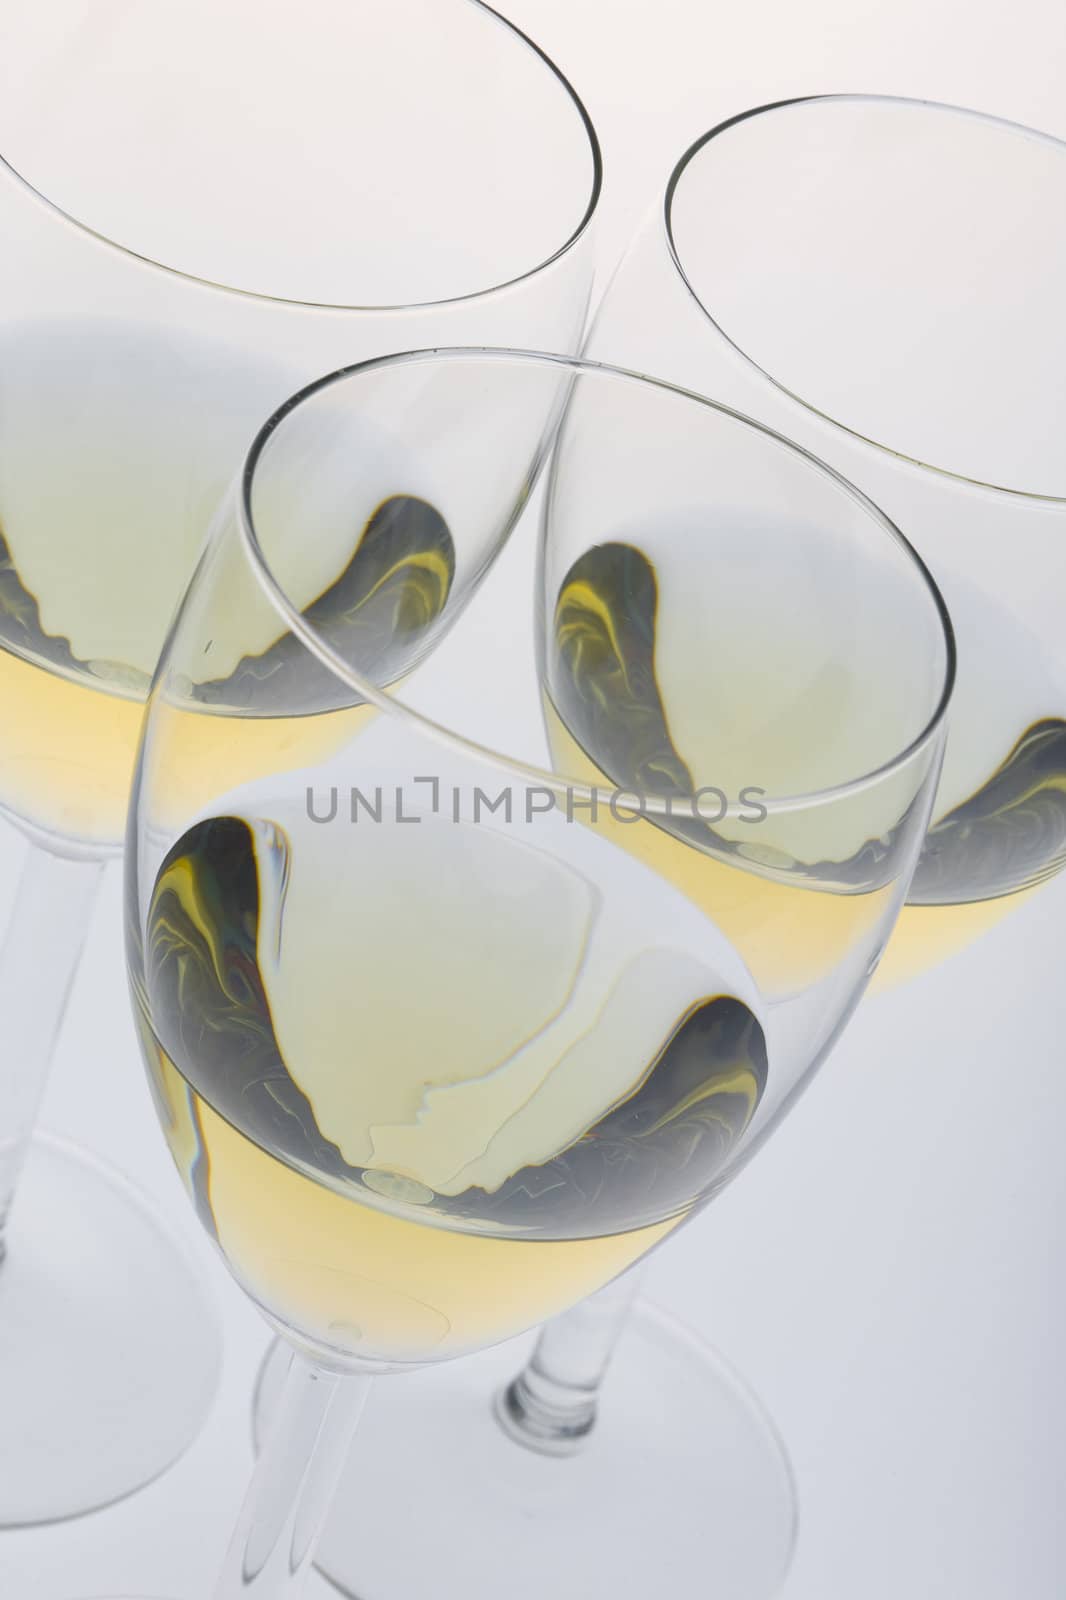 wineglasses with white wine by phbcz